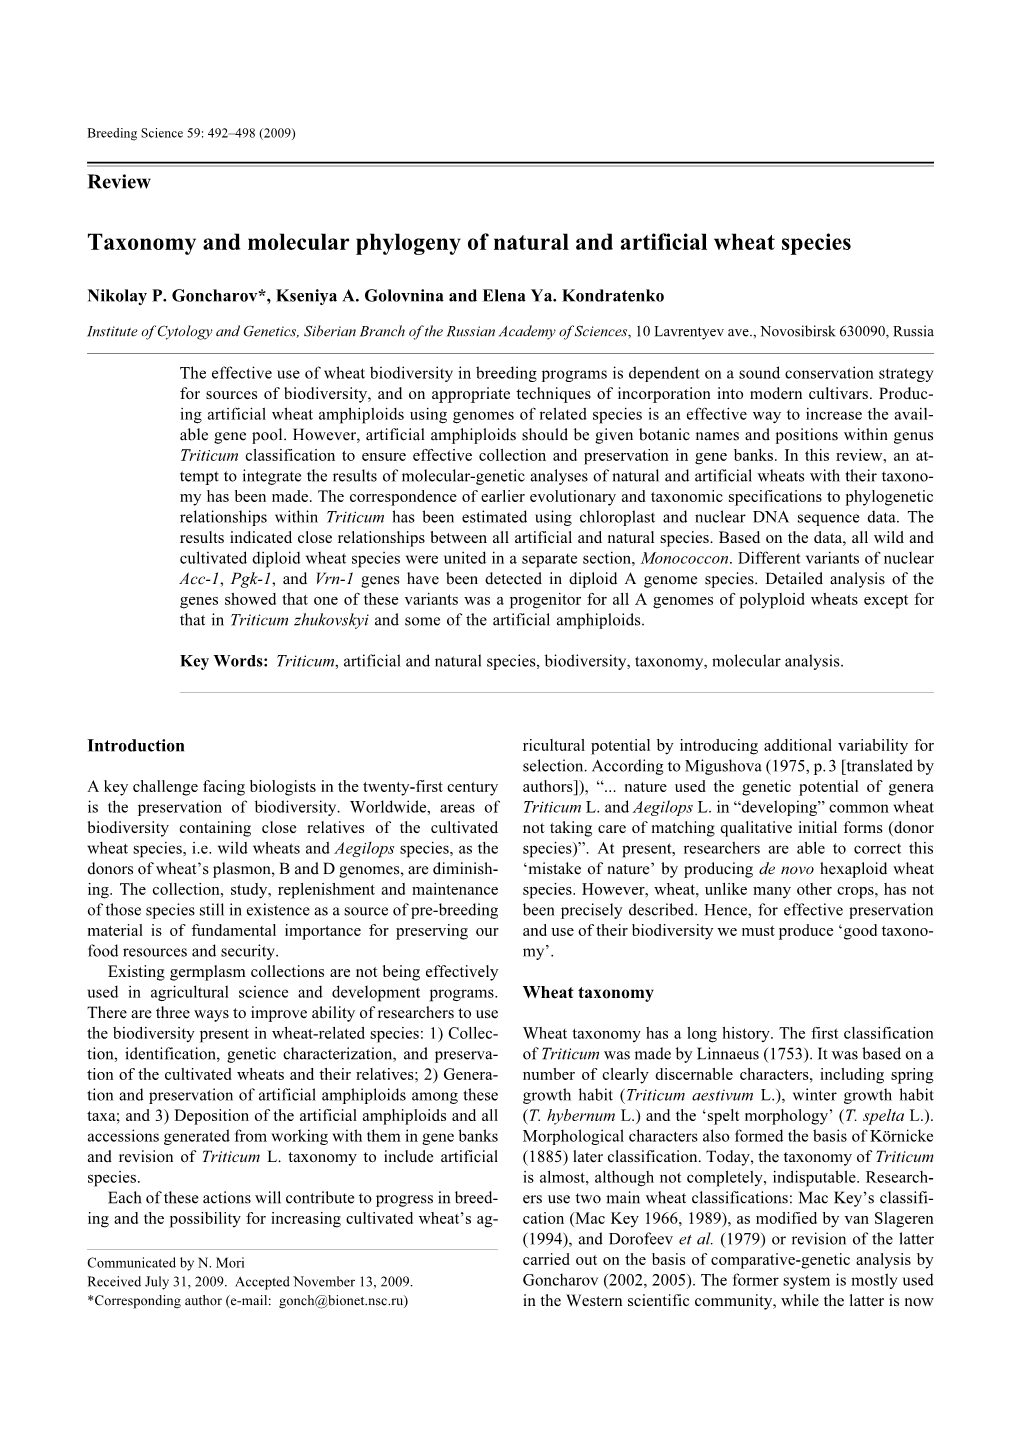 Taxonomy and Molecular Phylogeny of Natural and Artificial Wheat Species